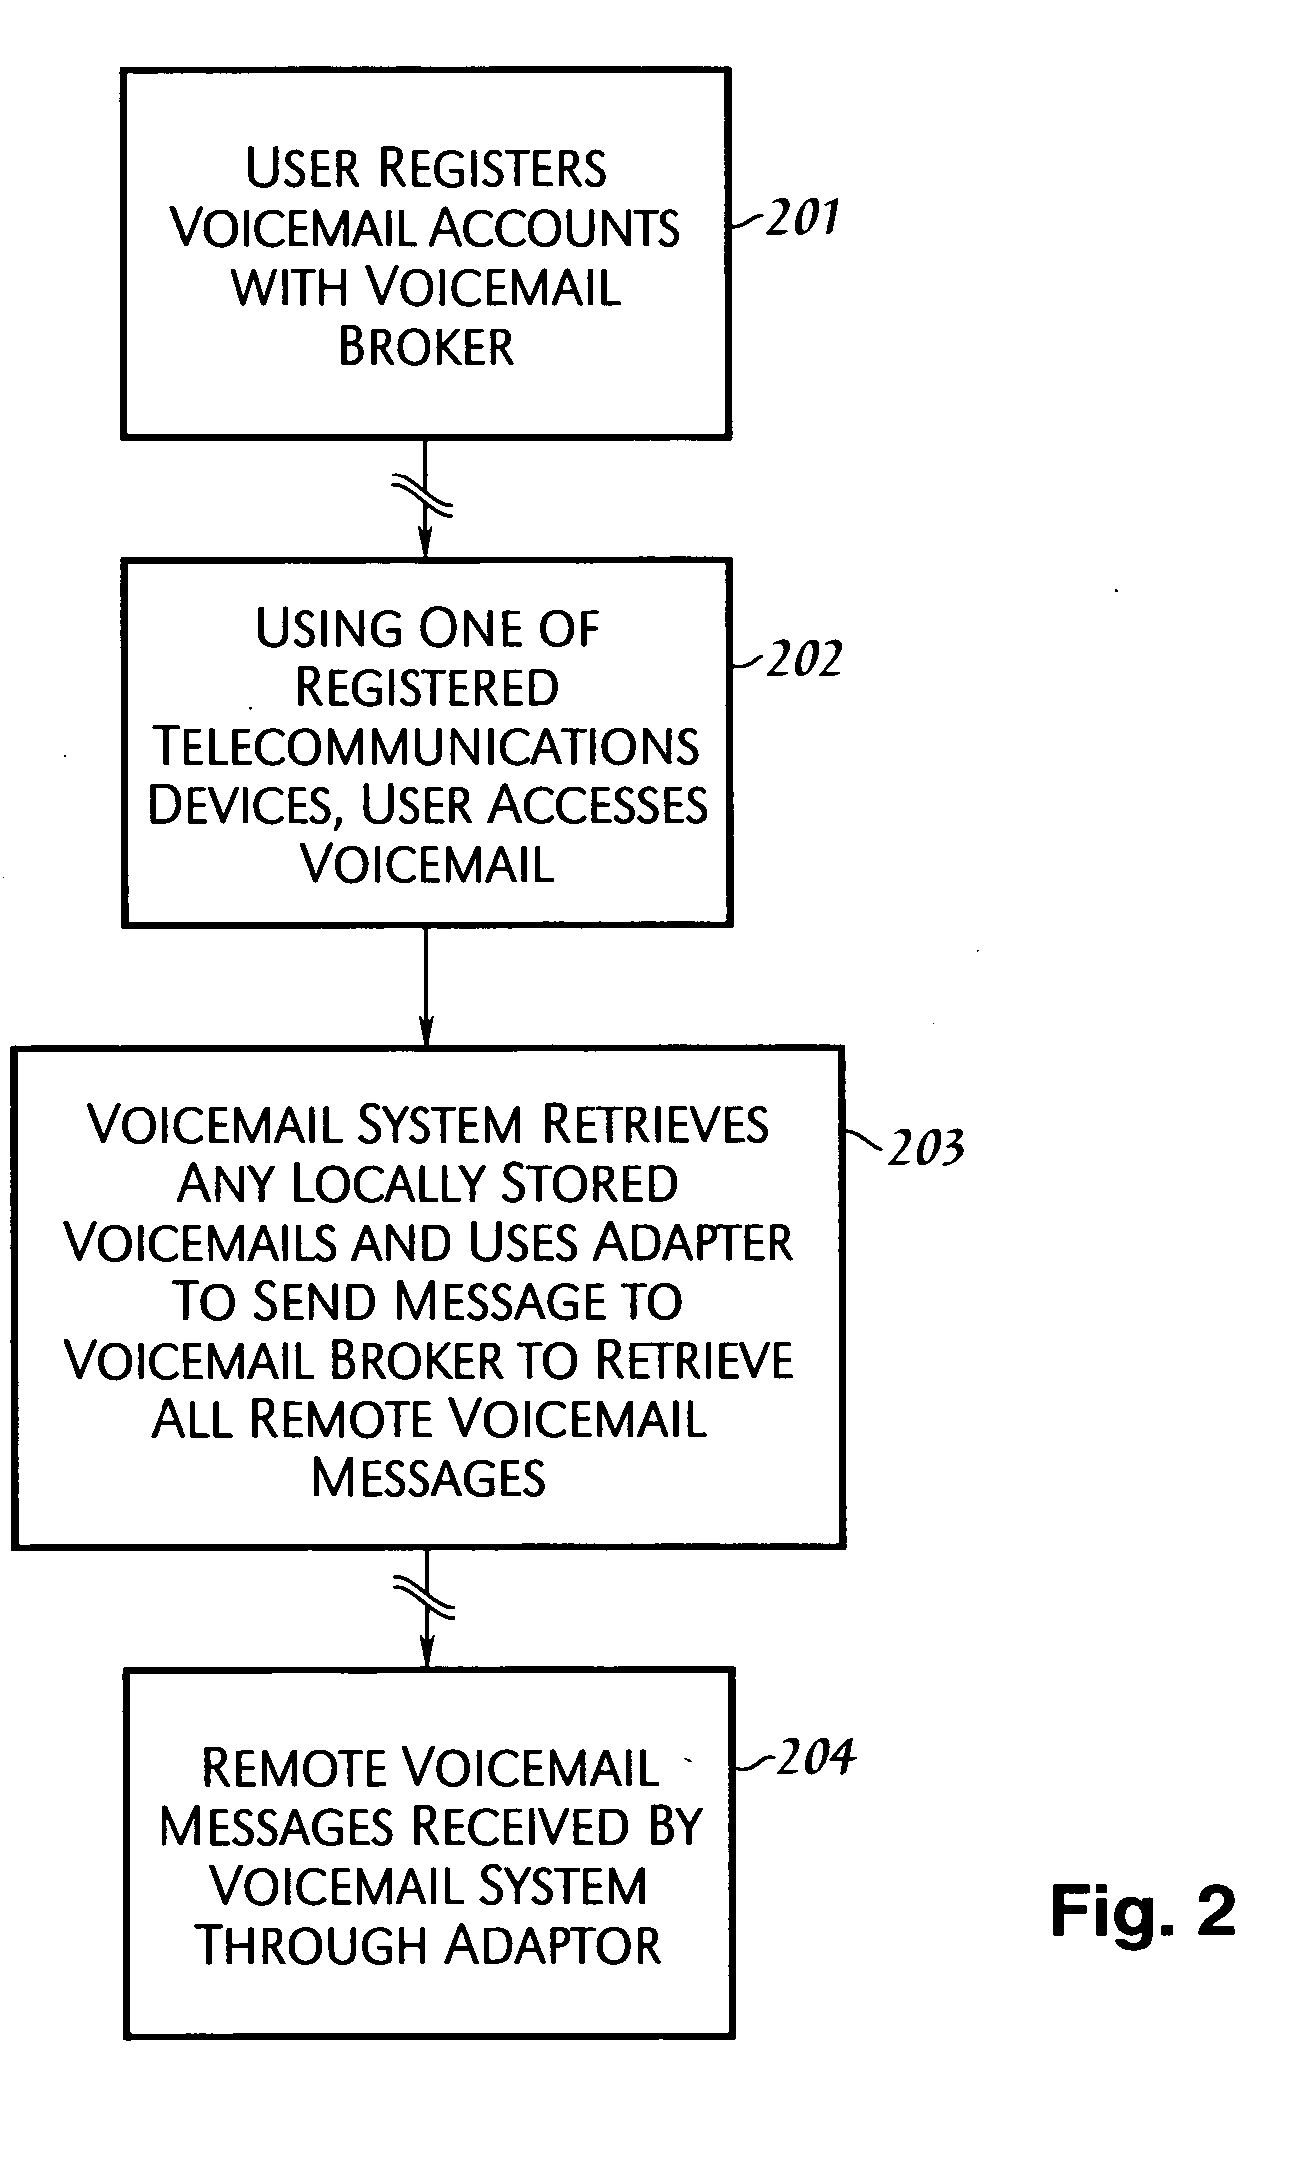 Coalescence of voice mail systems